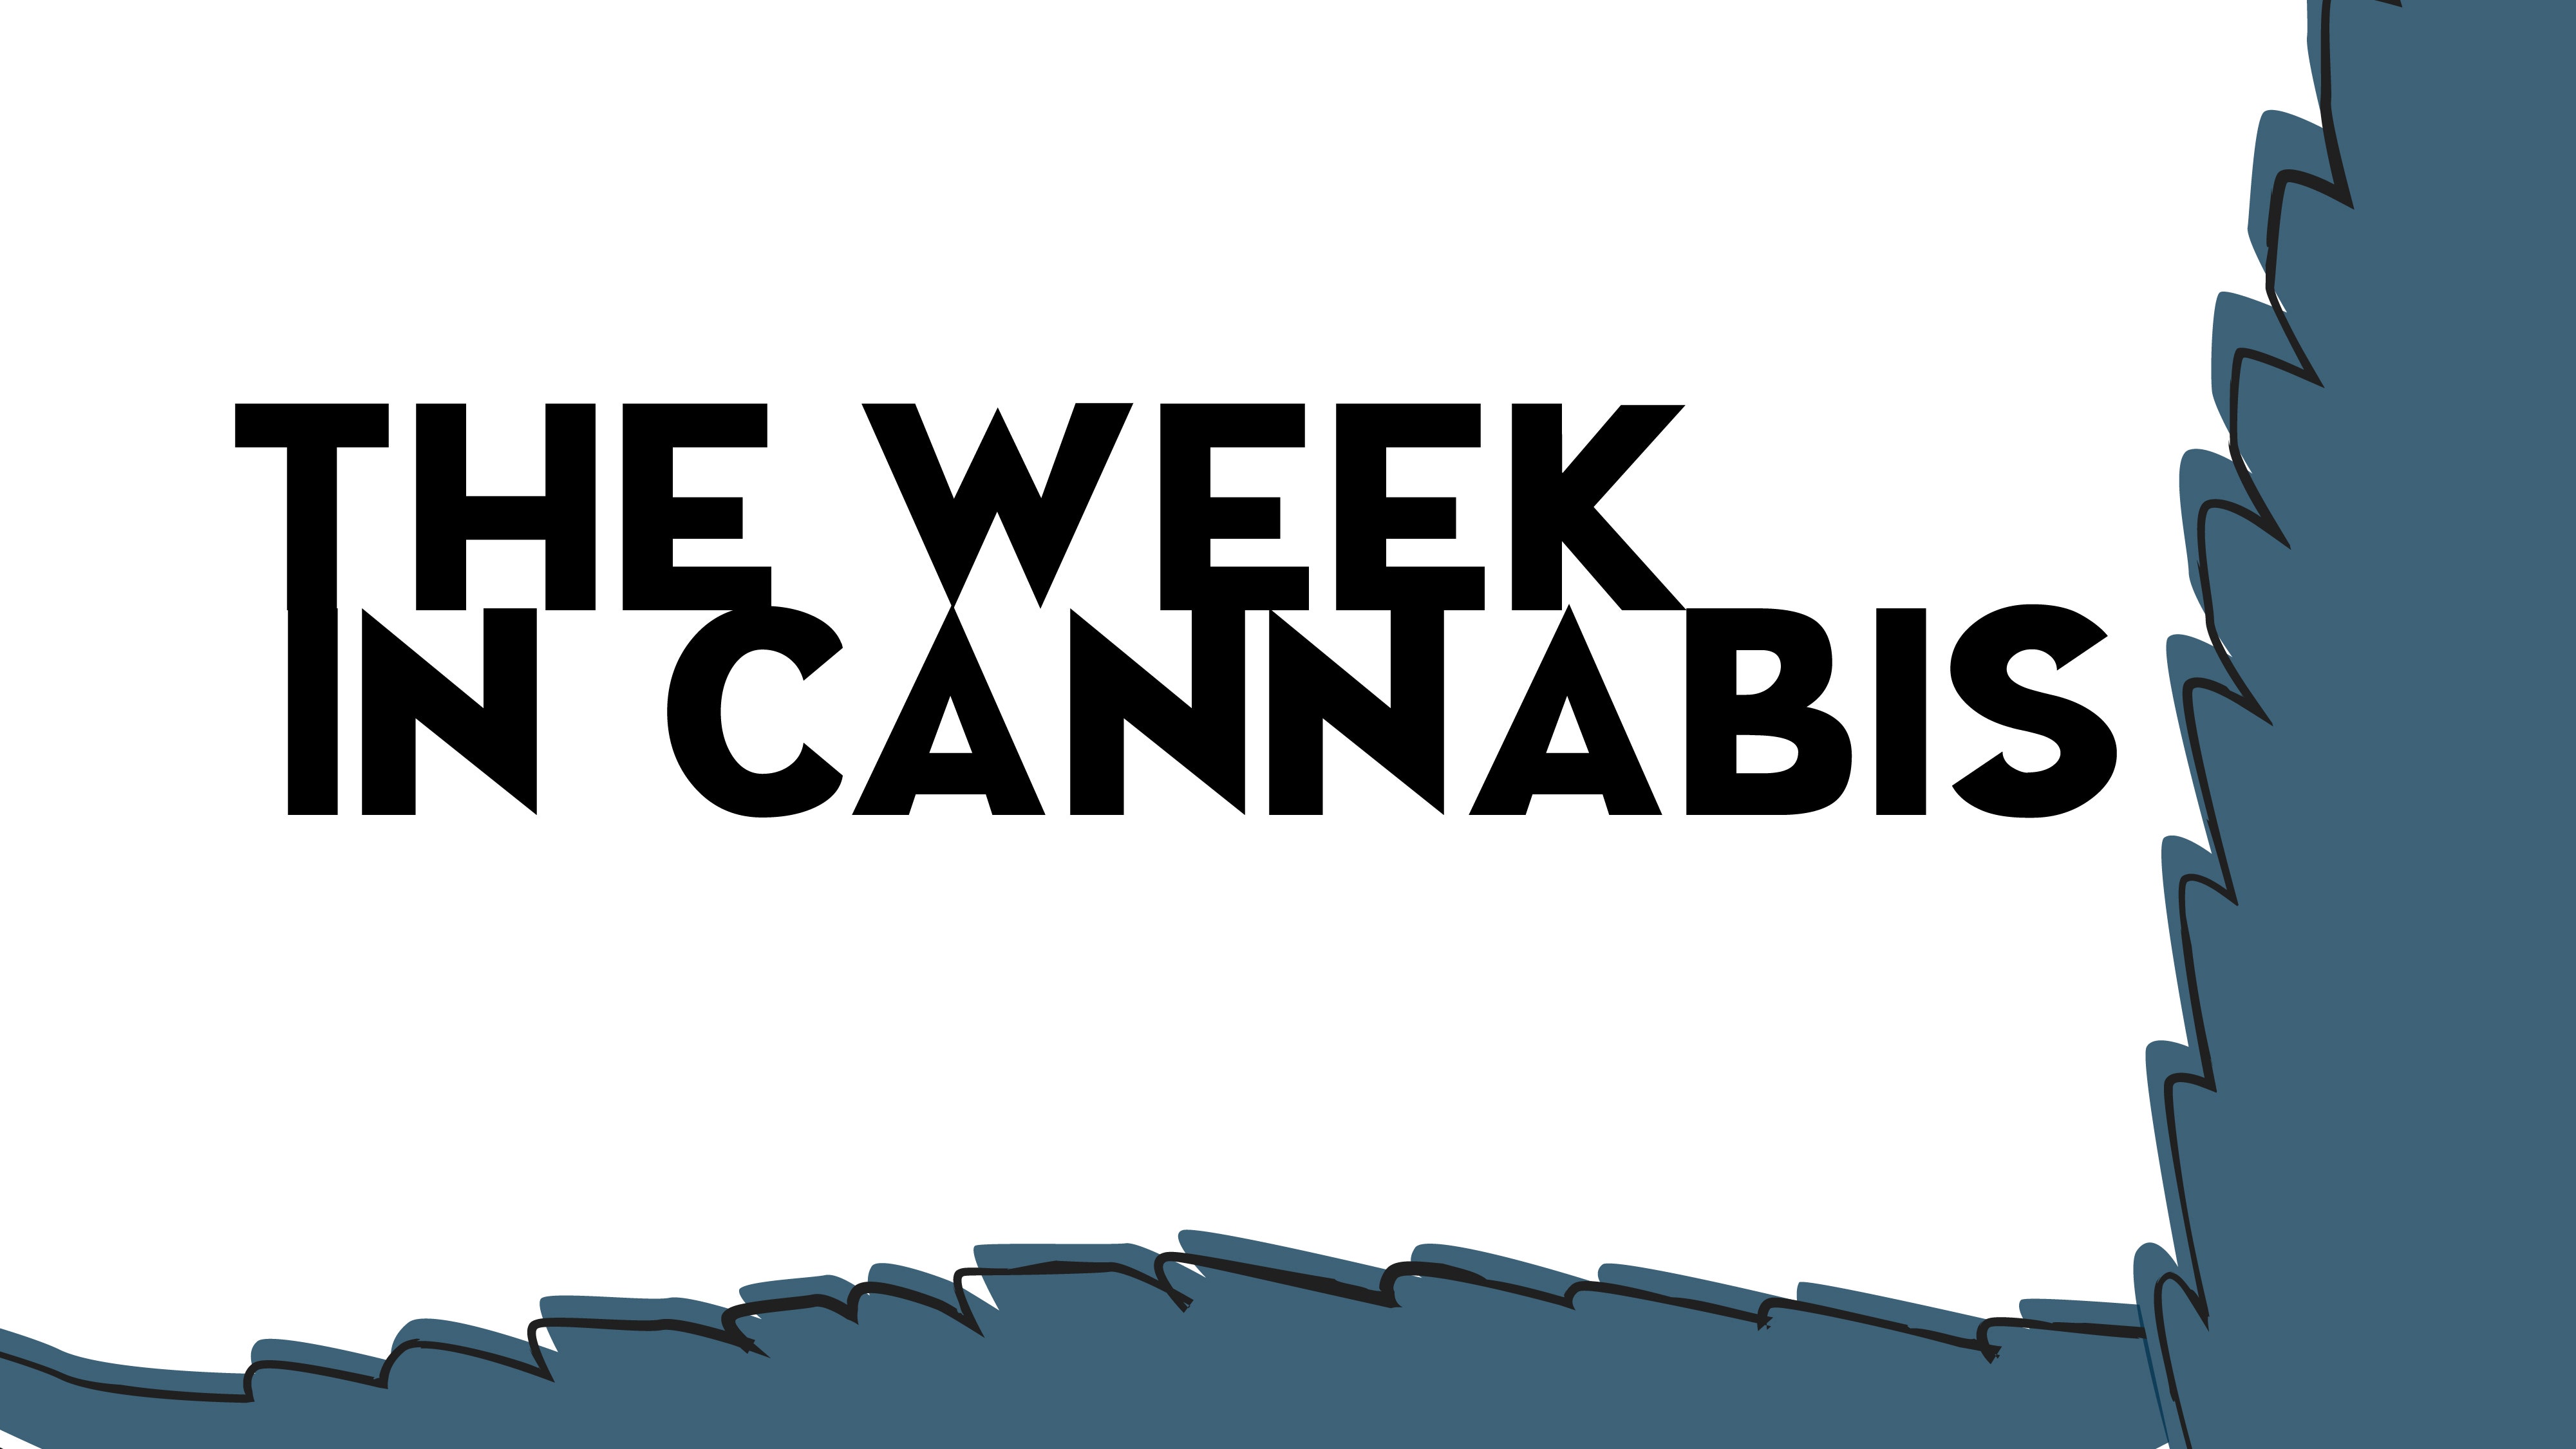 The Week In Cannabis: Canopy's Earnings, JPMorgan's Restrictions, A Slew Of Earnings, Big Policy Moves